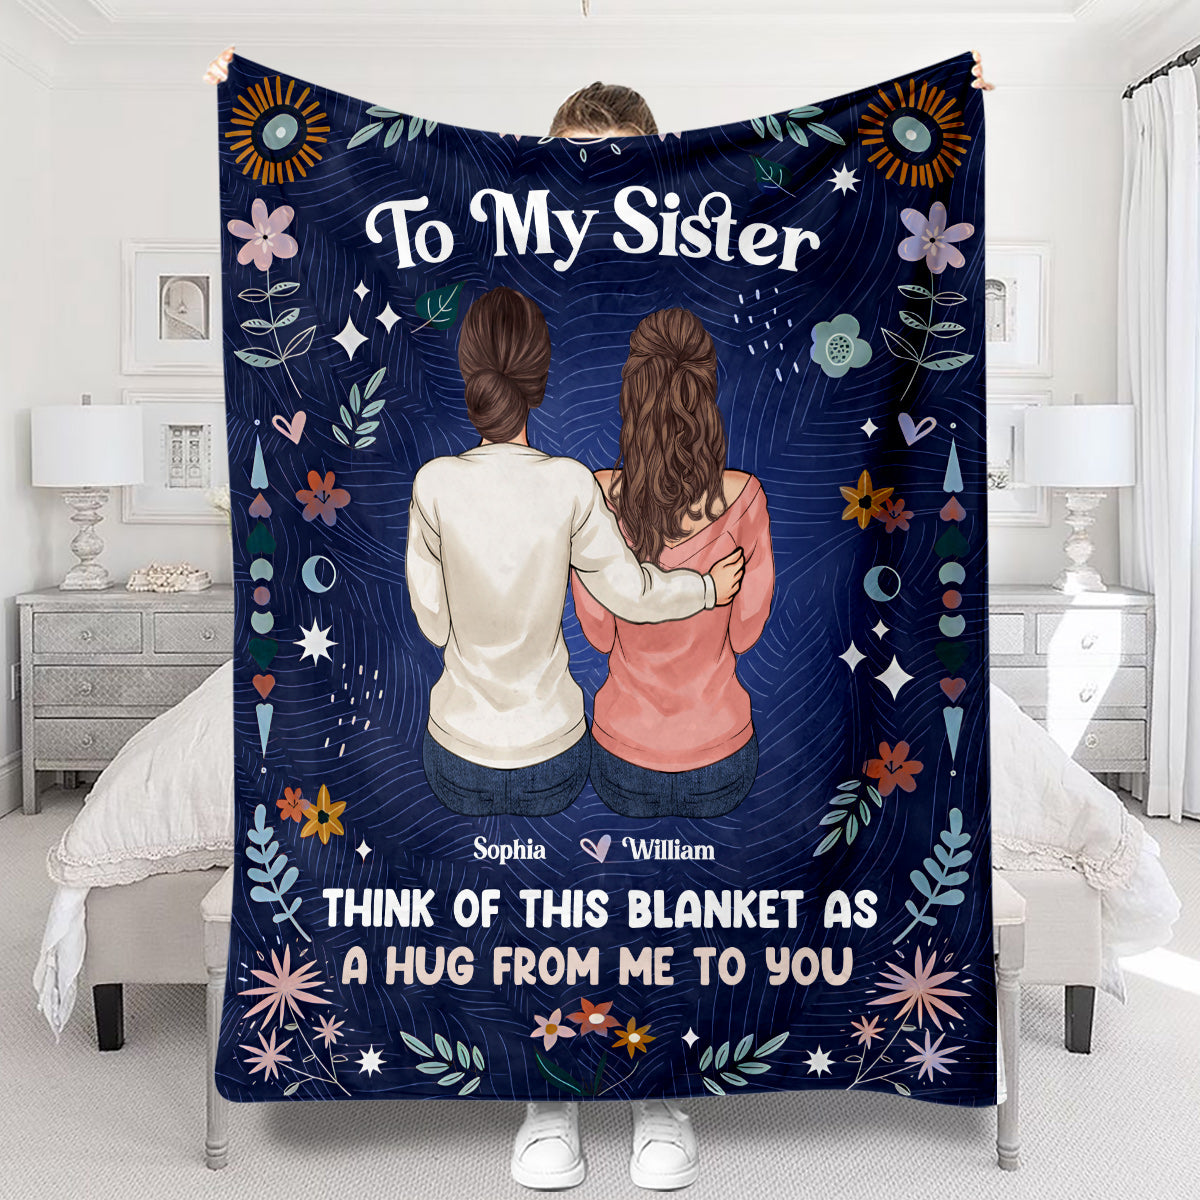 Think Of This Blanket As A Hug Of Me - Personalized Sibling Blanket